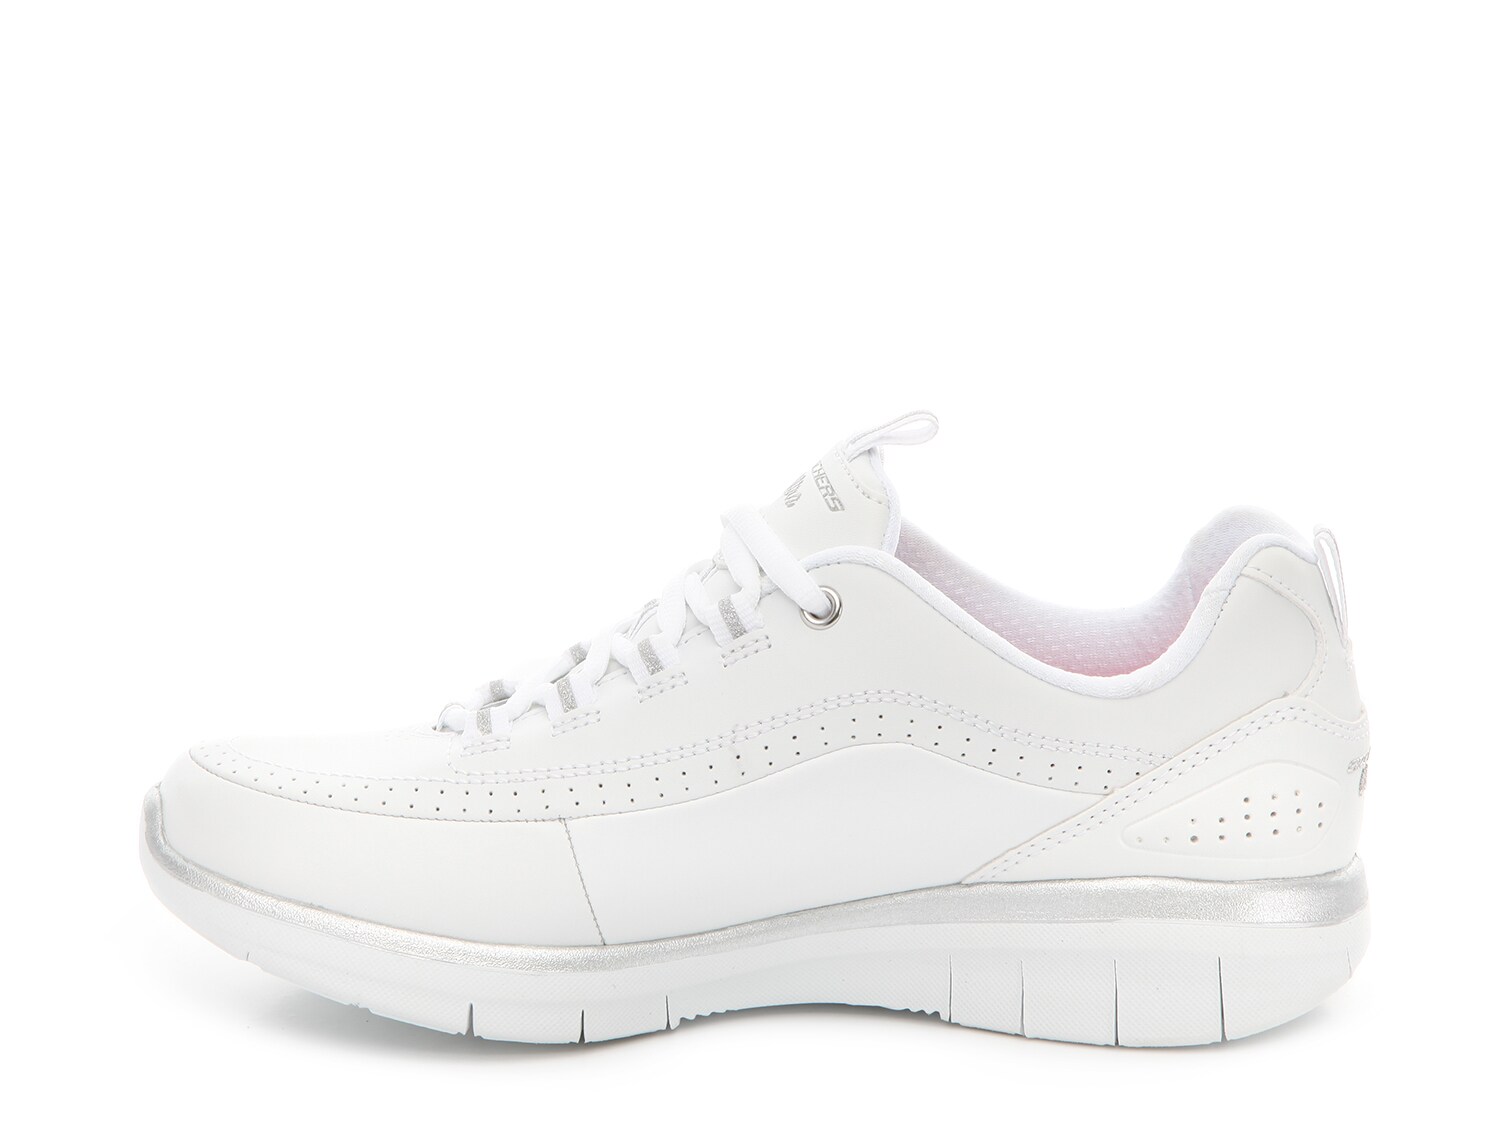 skechers synergy 2.0 classic women's lace up sneakers